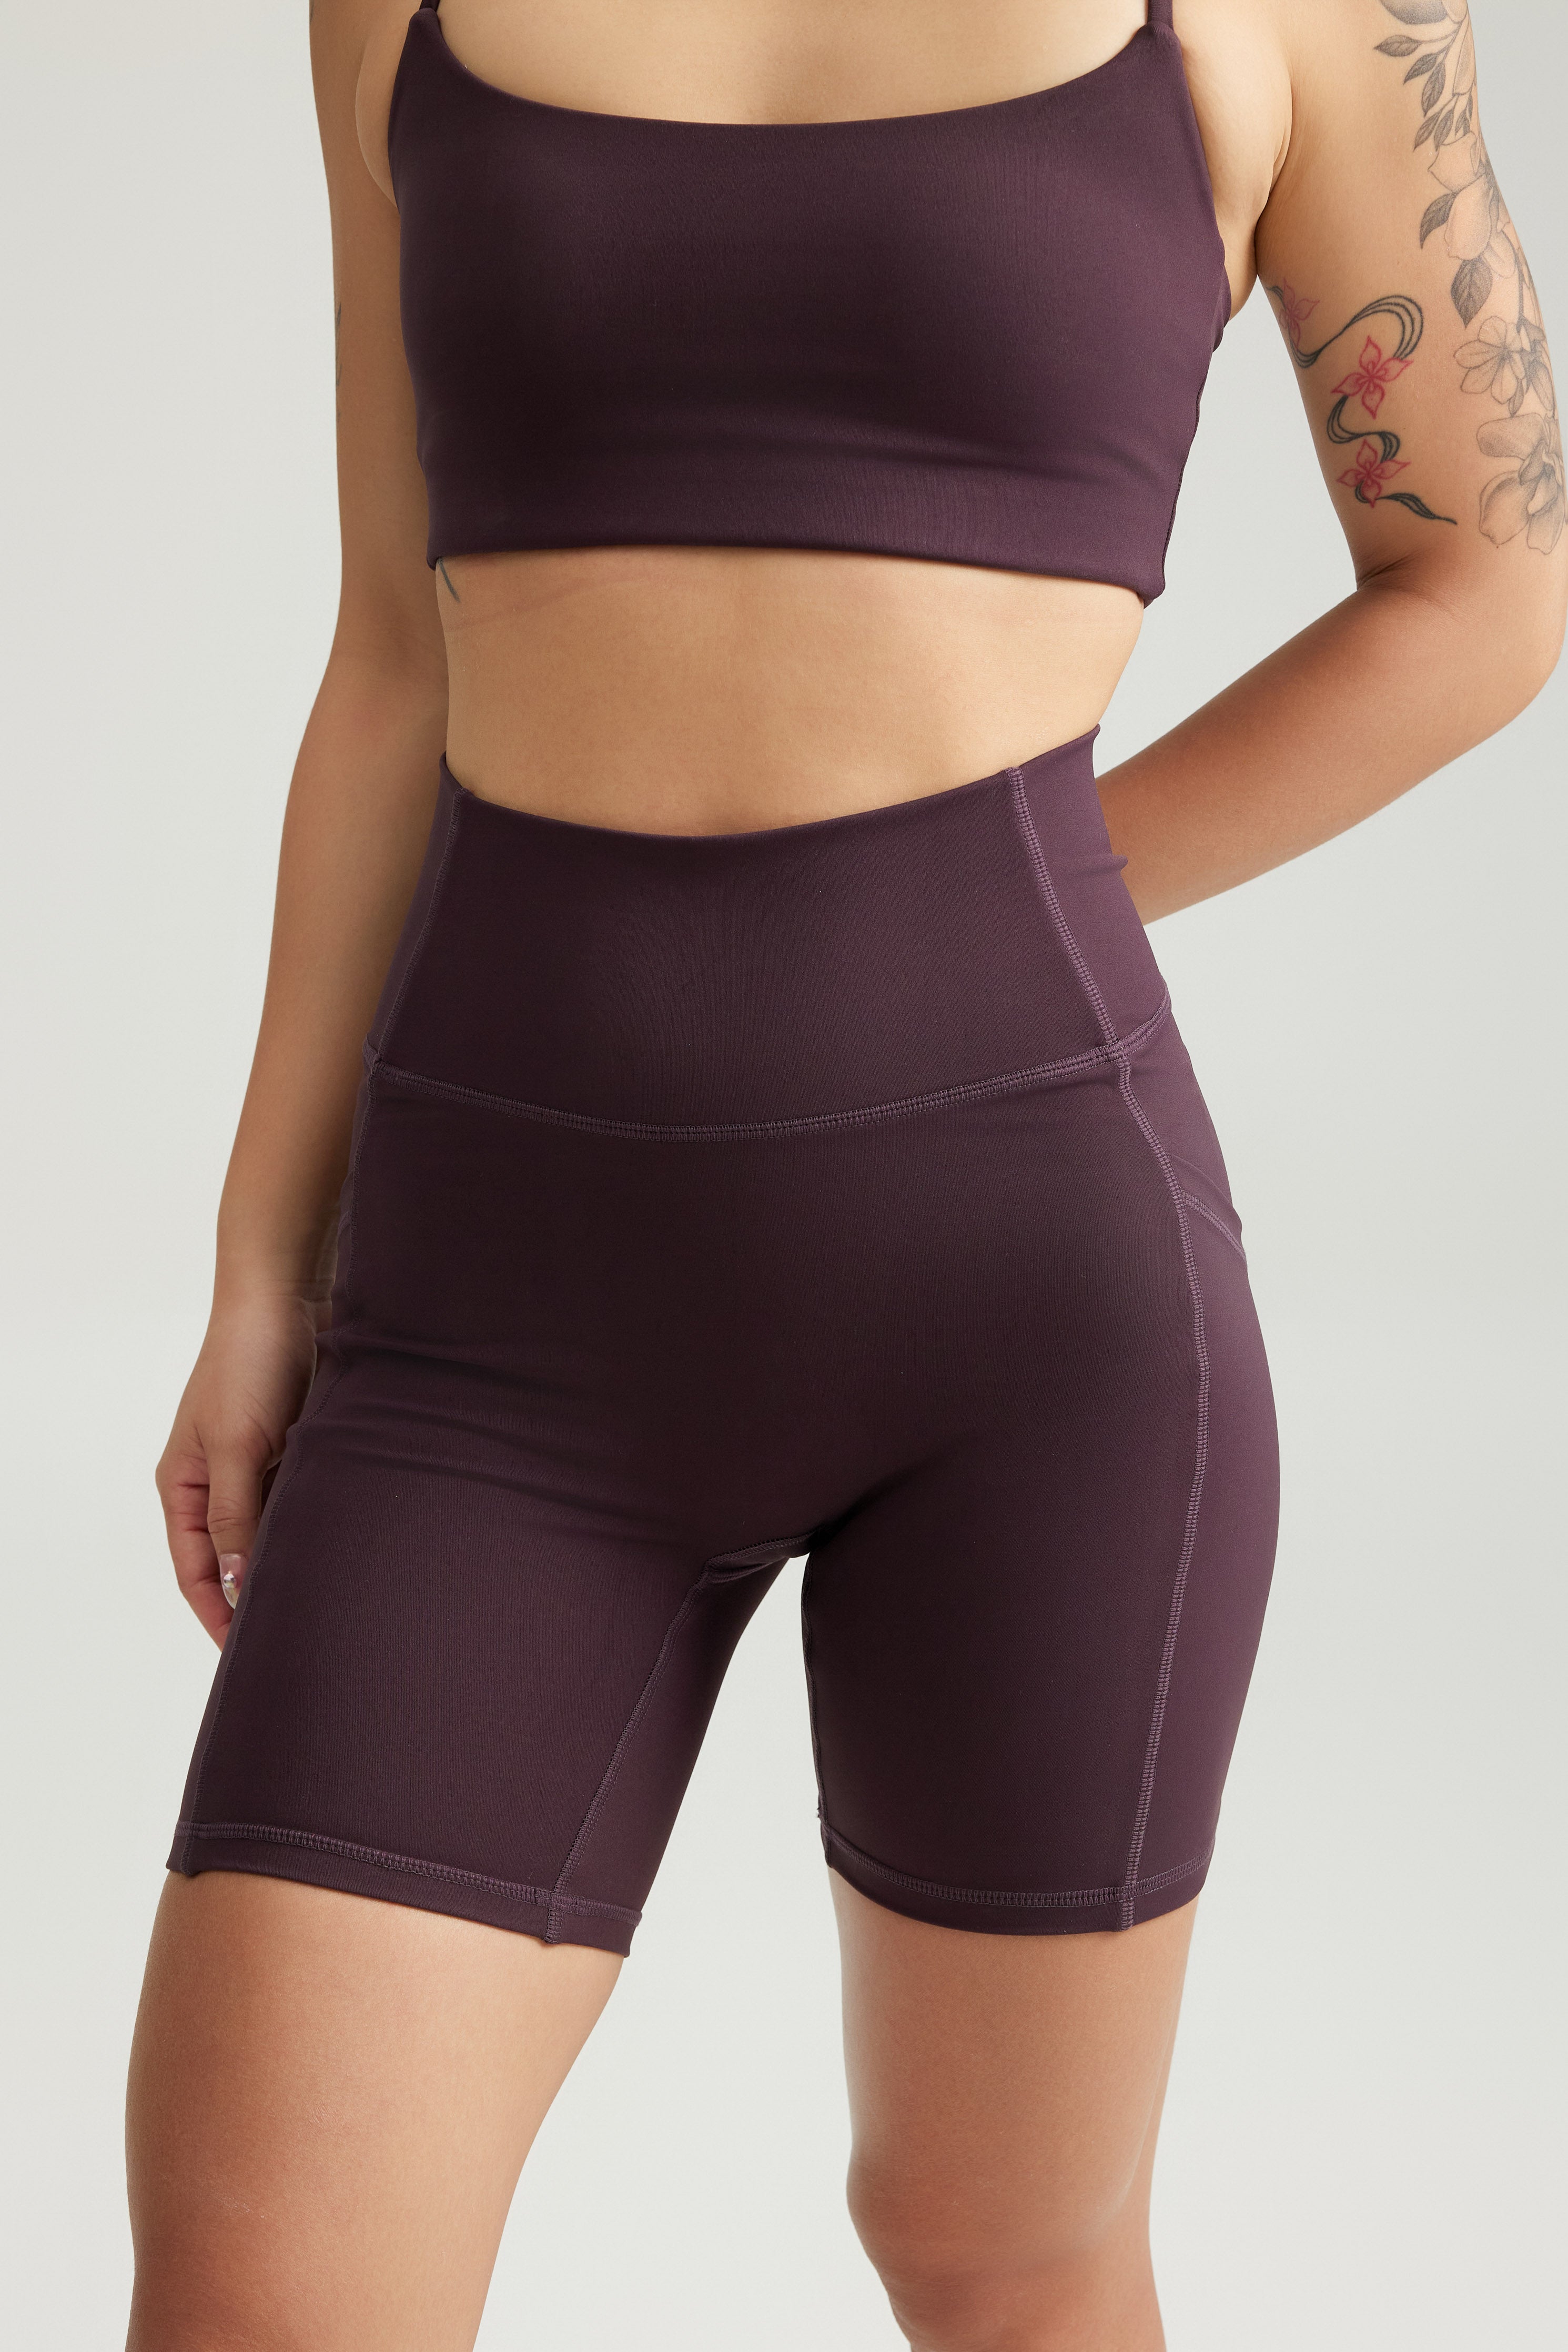 Women's Yoga and Gym Wear, Anya Active